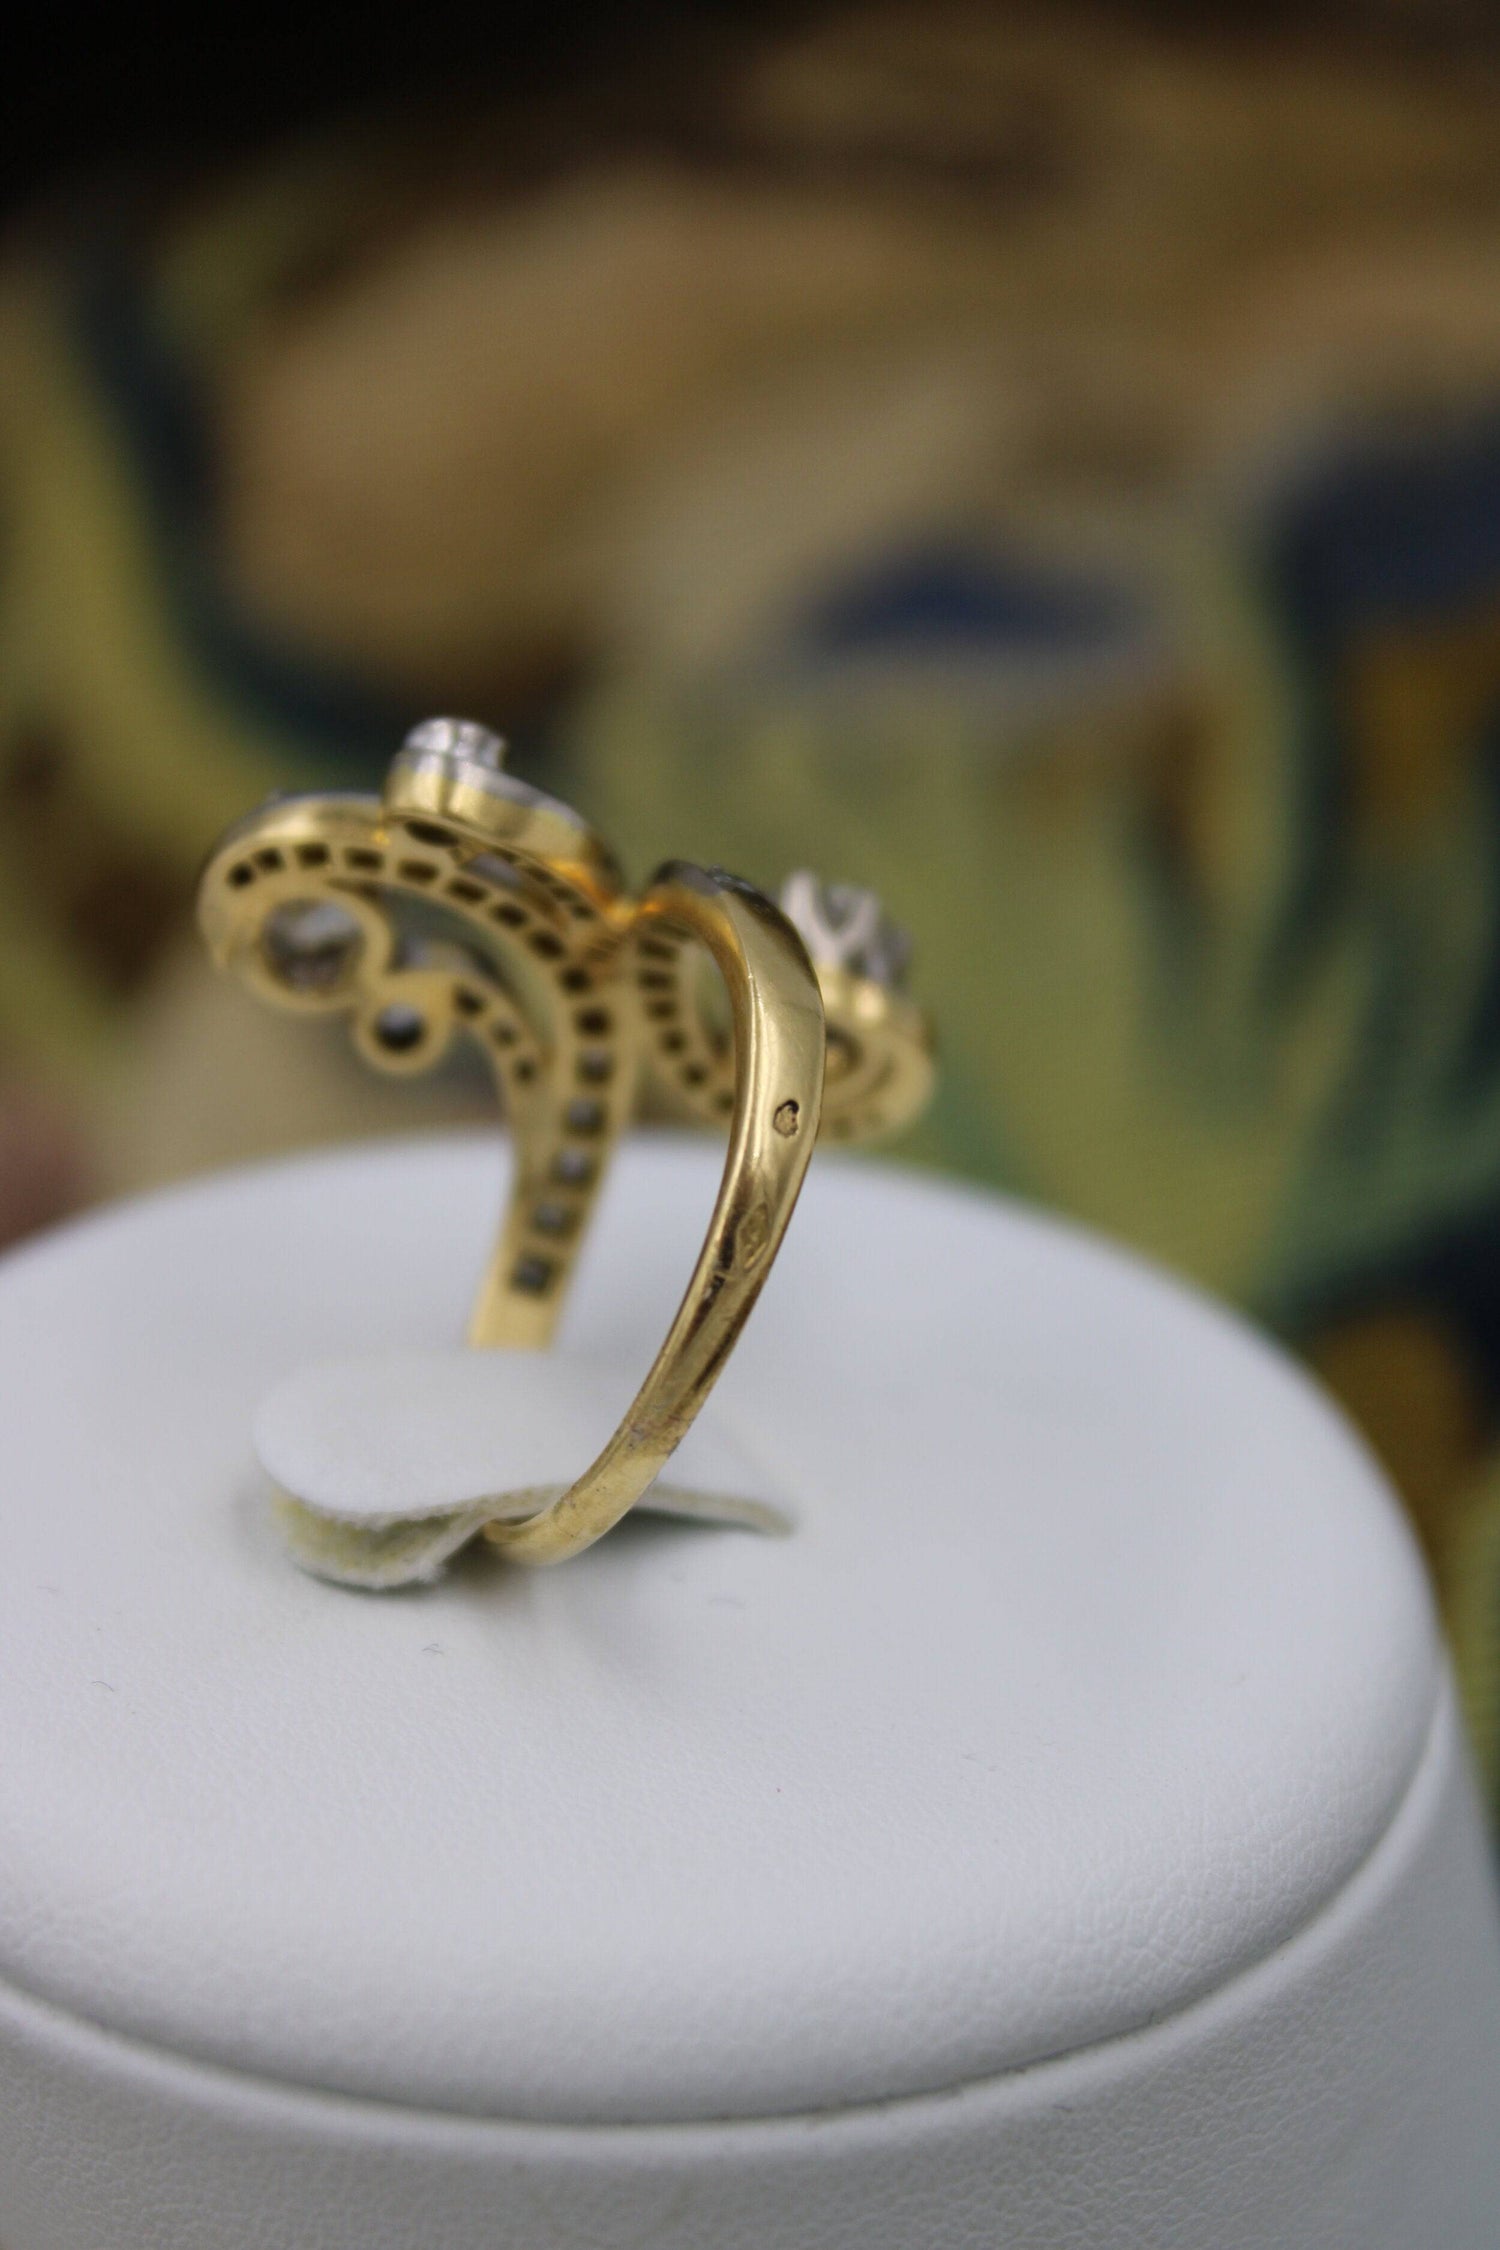 A very fine Belle Epoque Diamond Ring mounted in 18ct Yellow Gold & Platinum, French, Circa 1905 - Robin Haydock Antiques